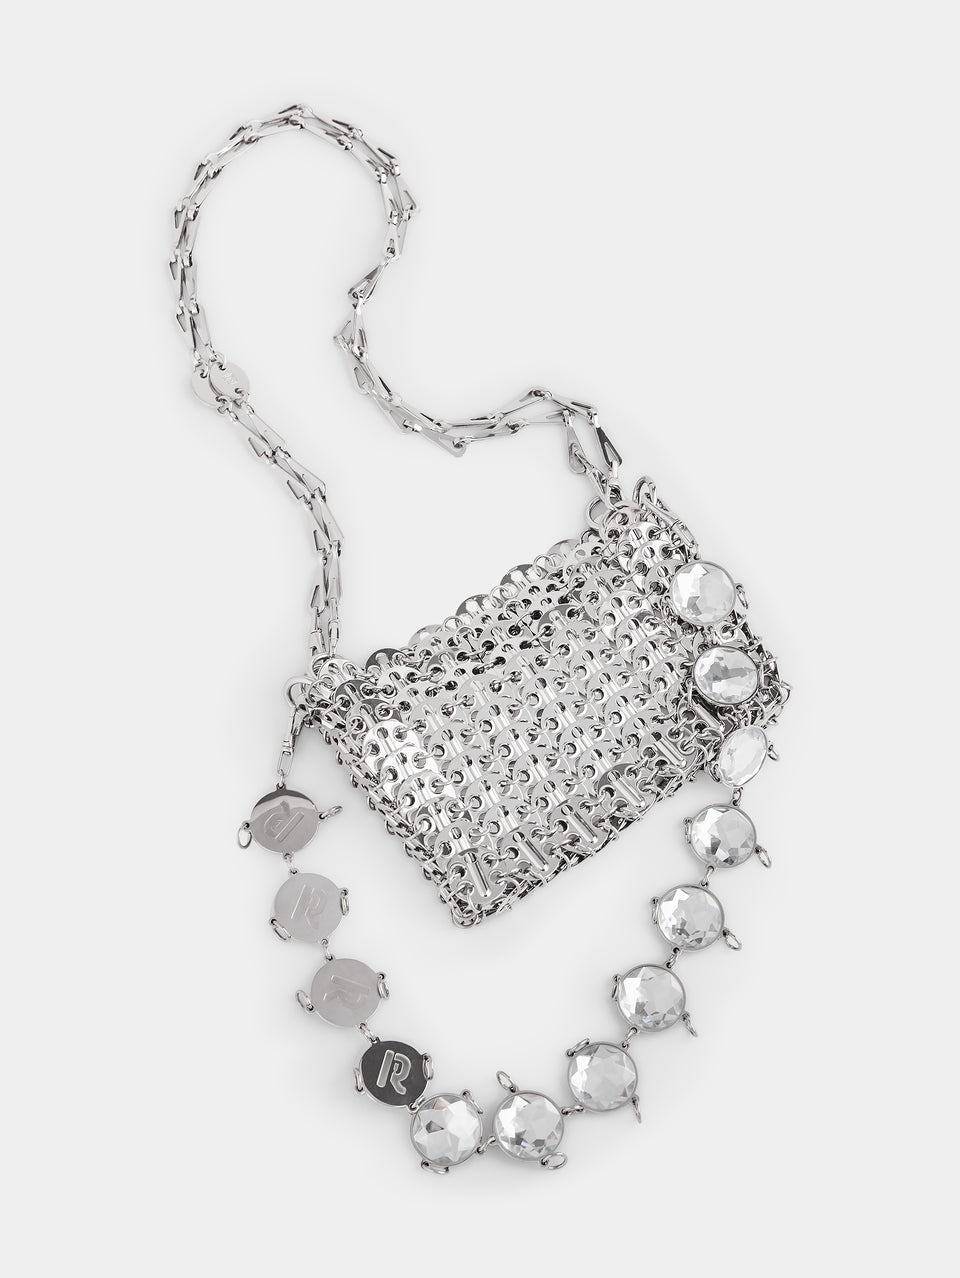 iconic Nano 1969 bag with oversized crystals chain